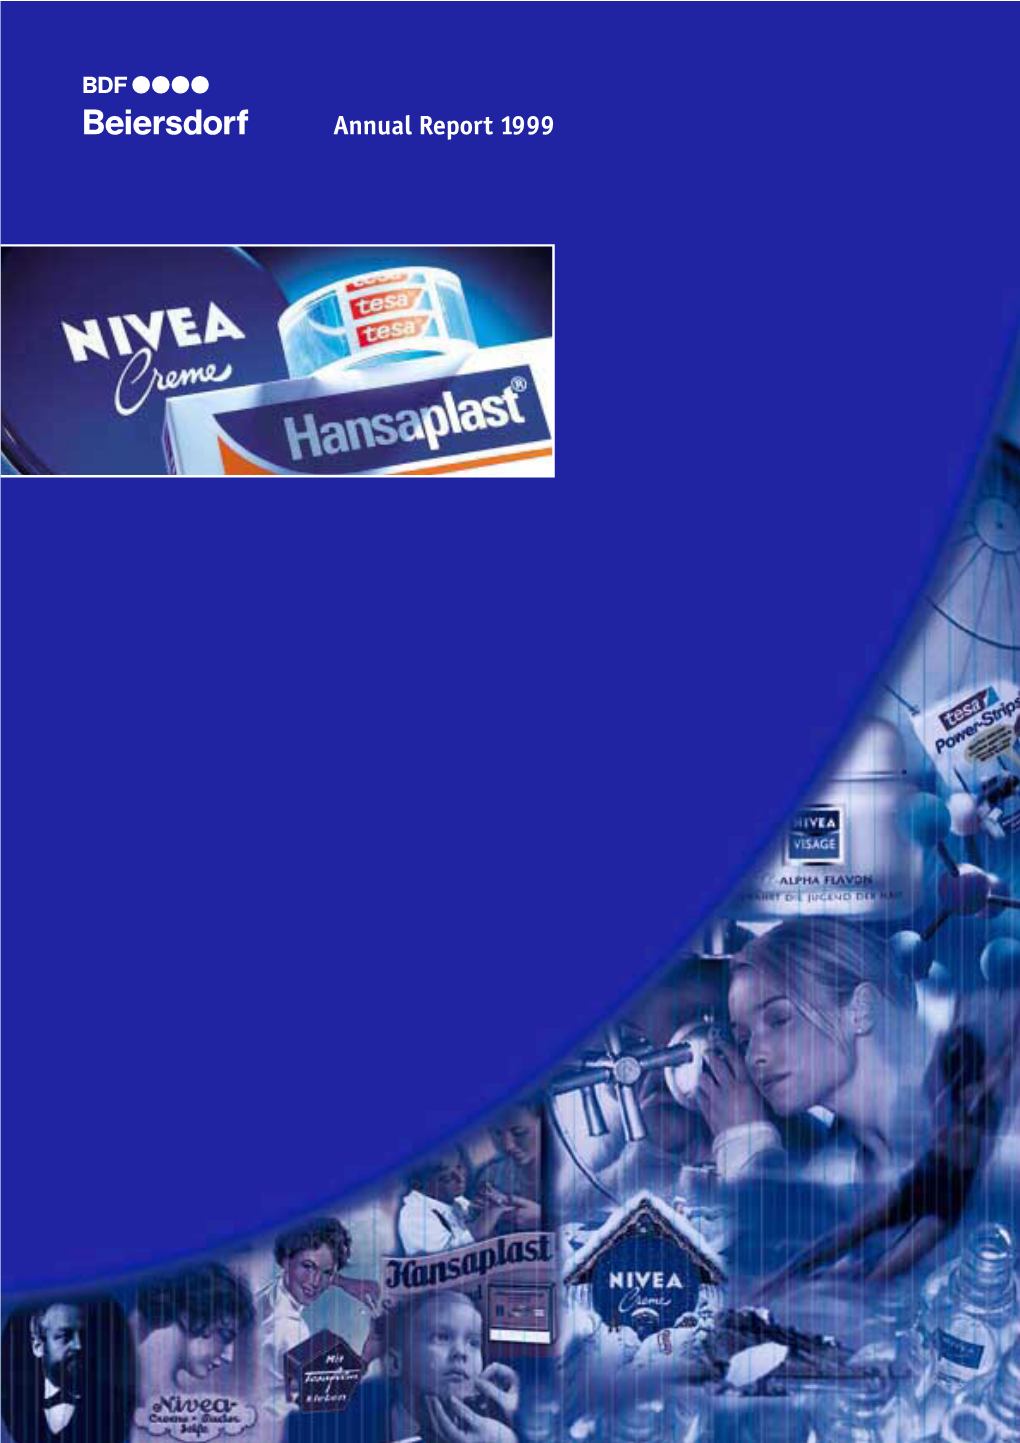 Annual Report 1999 Beiersdorf at a Glance